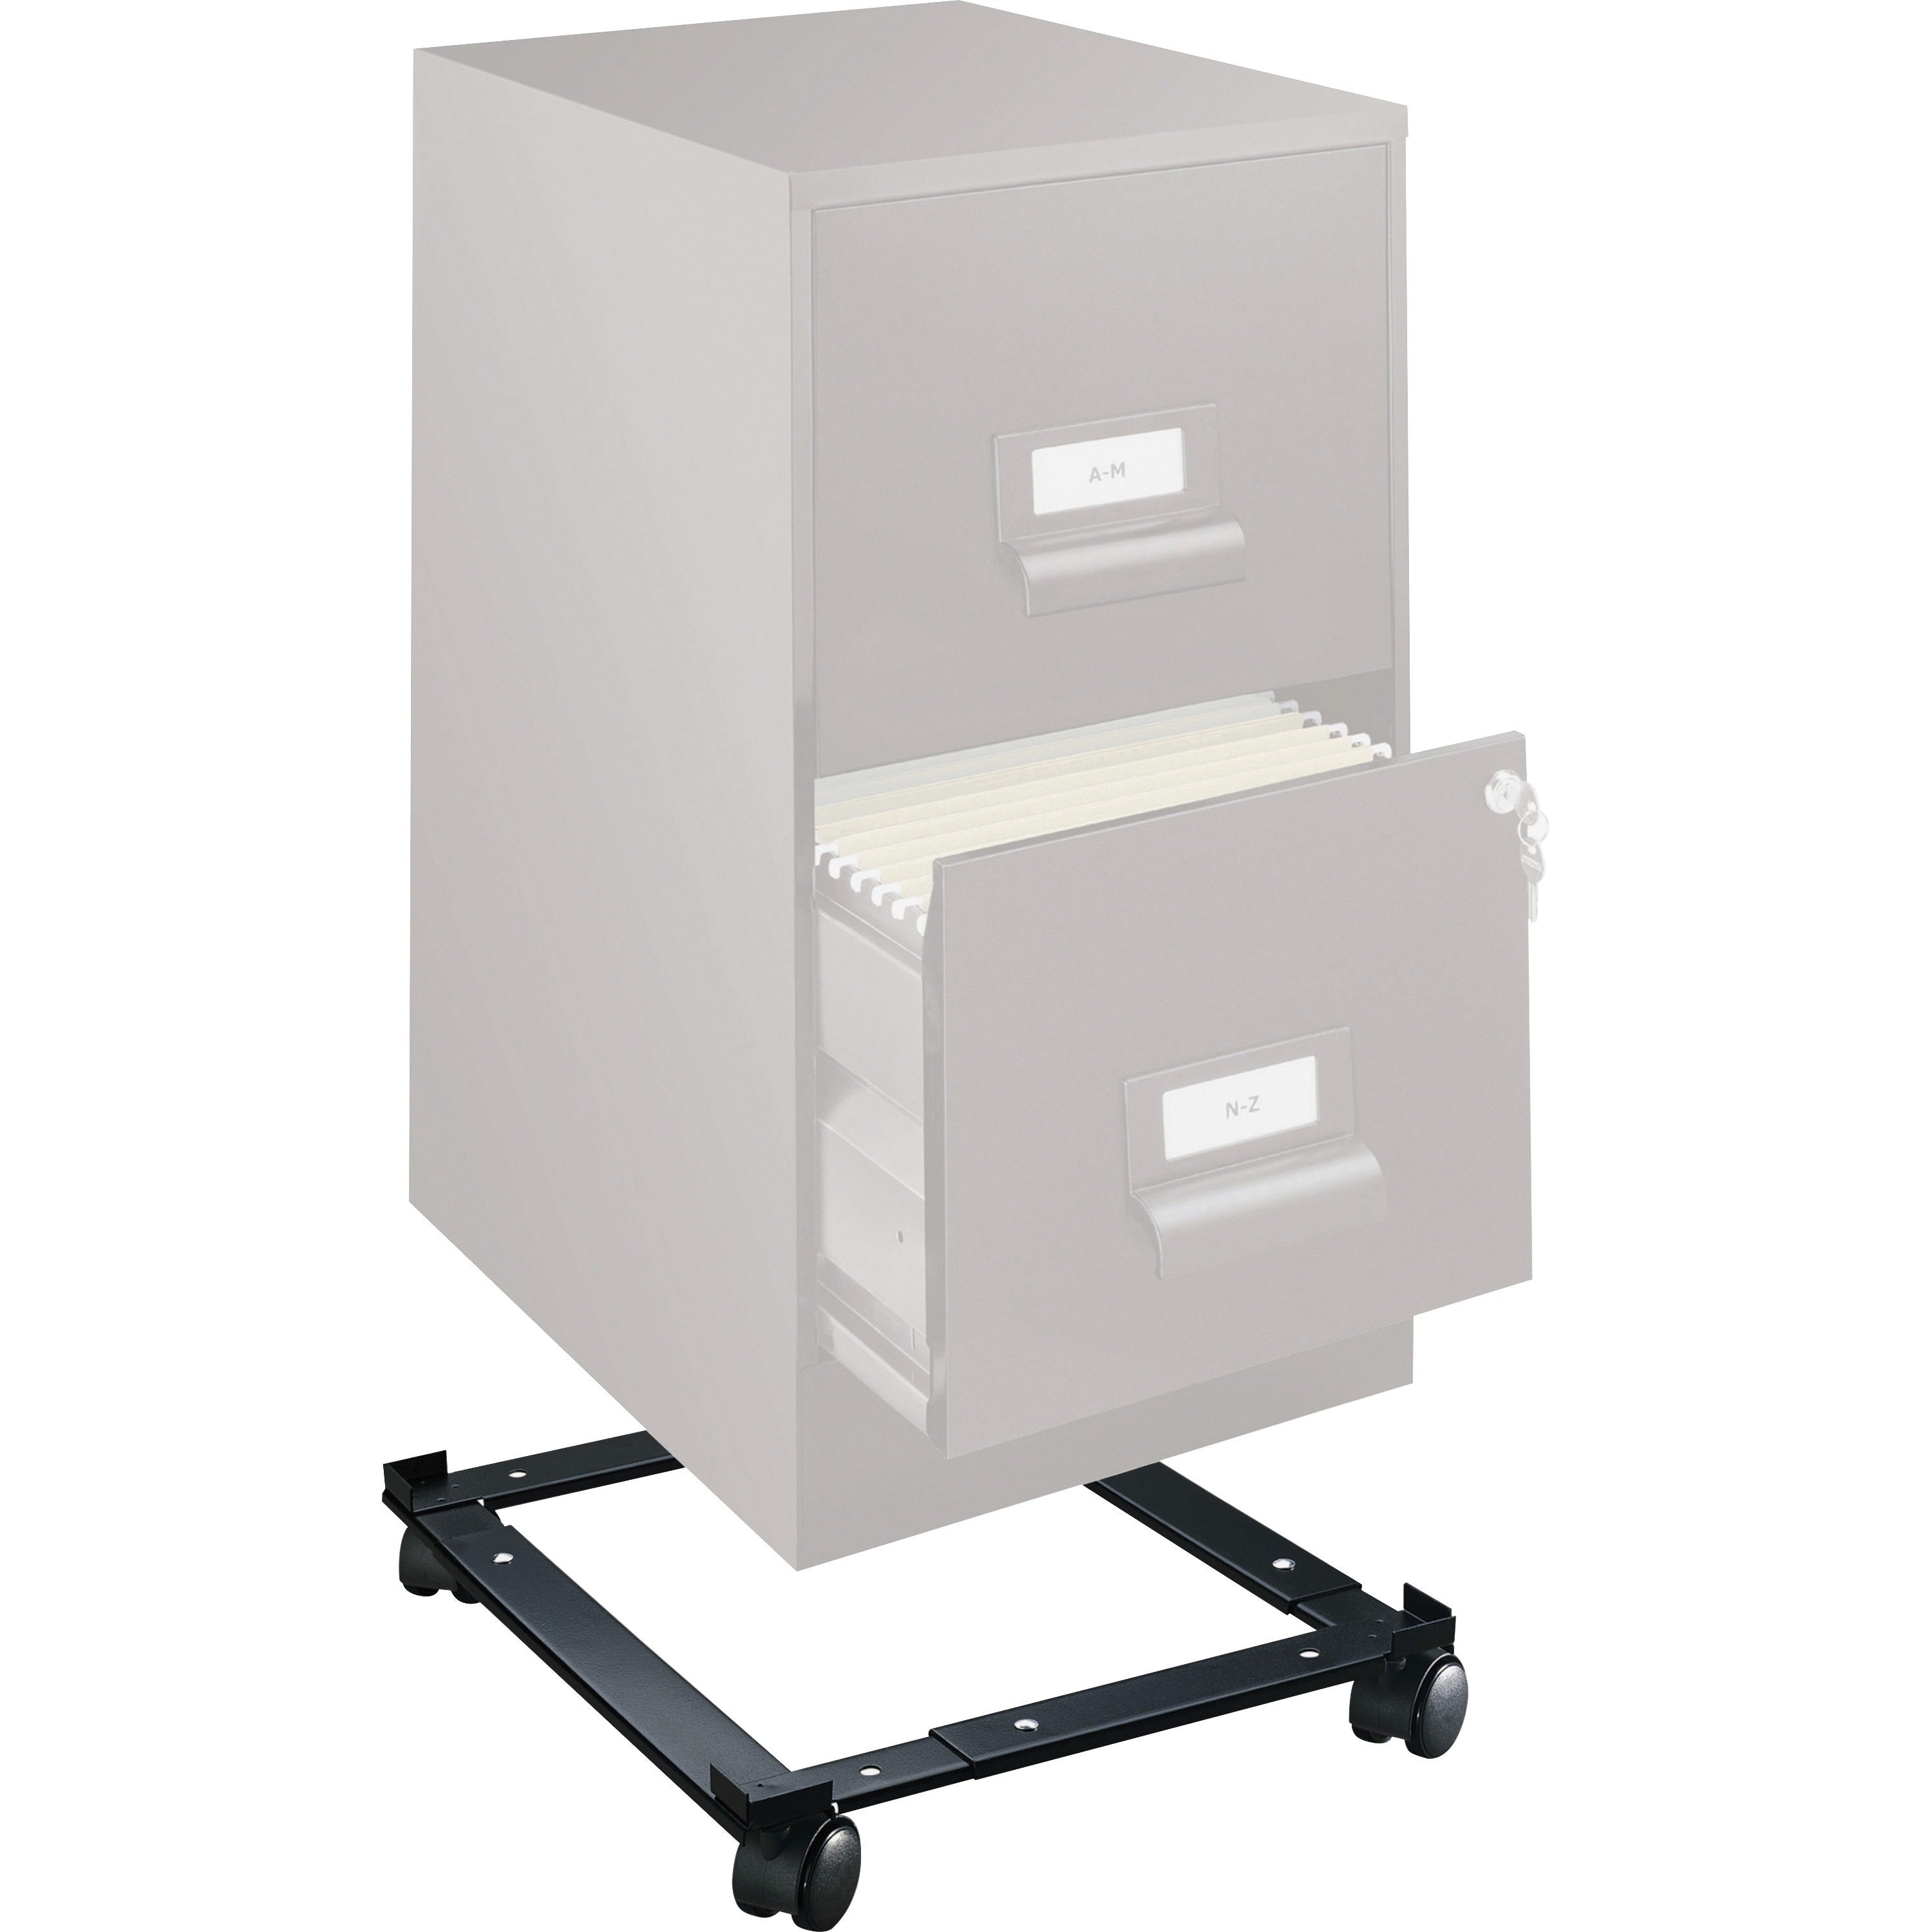 Lorell Commercial-Grade File Caddy - 400 lb Capacity - 4 Casters - Steel - x 16.6" Width x 11.4" Depth x 4" Height - Black - 1 Each - 